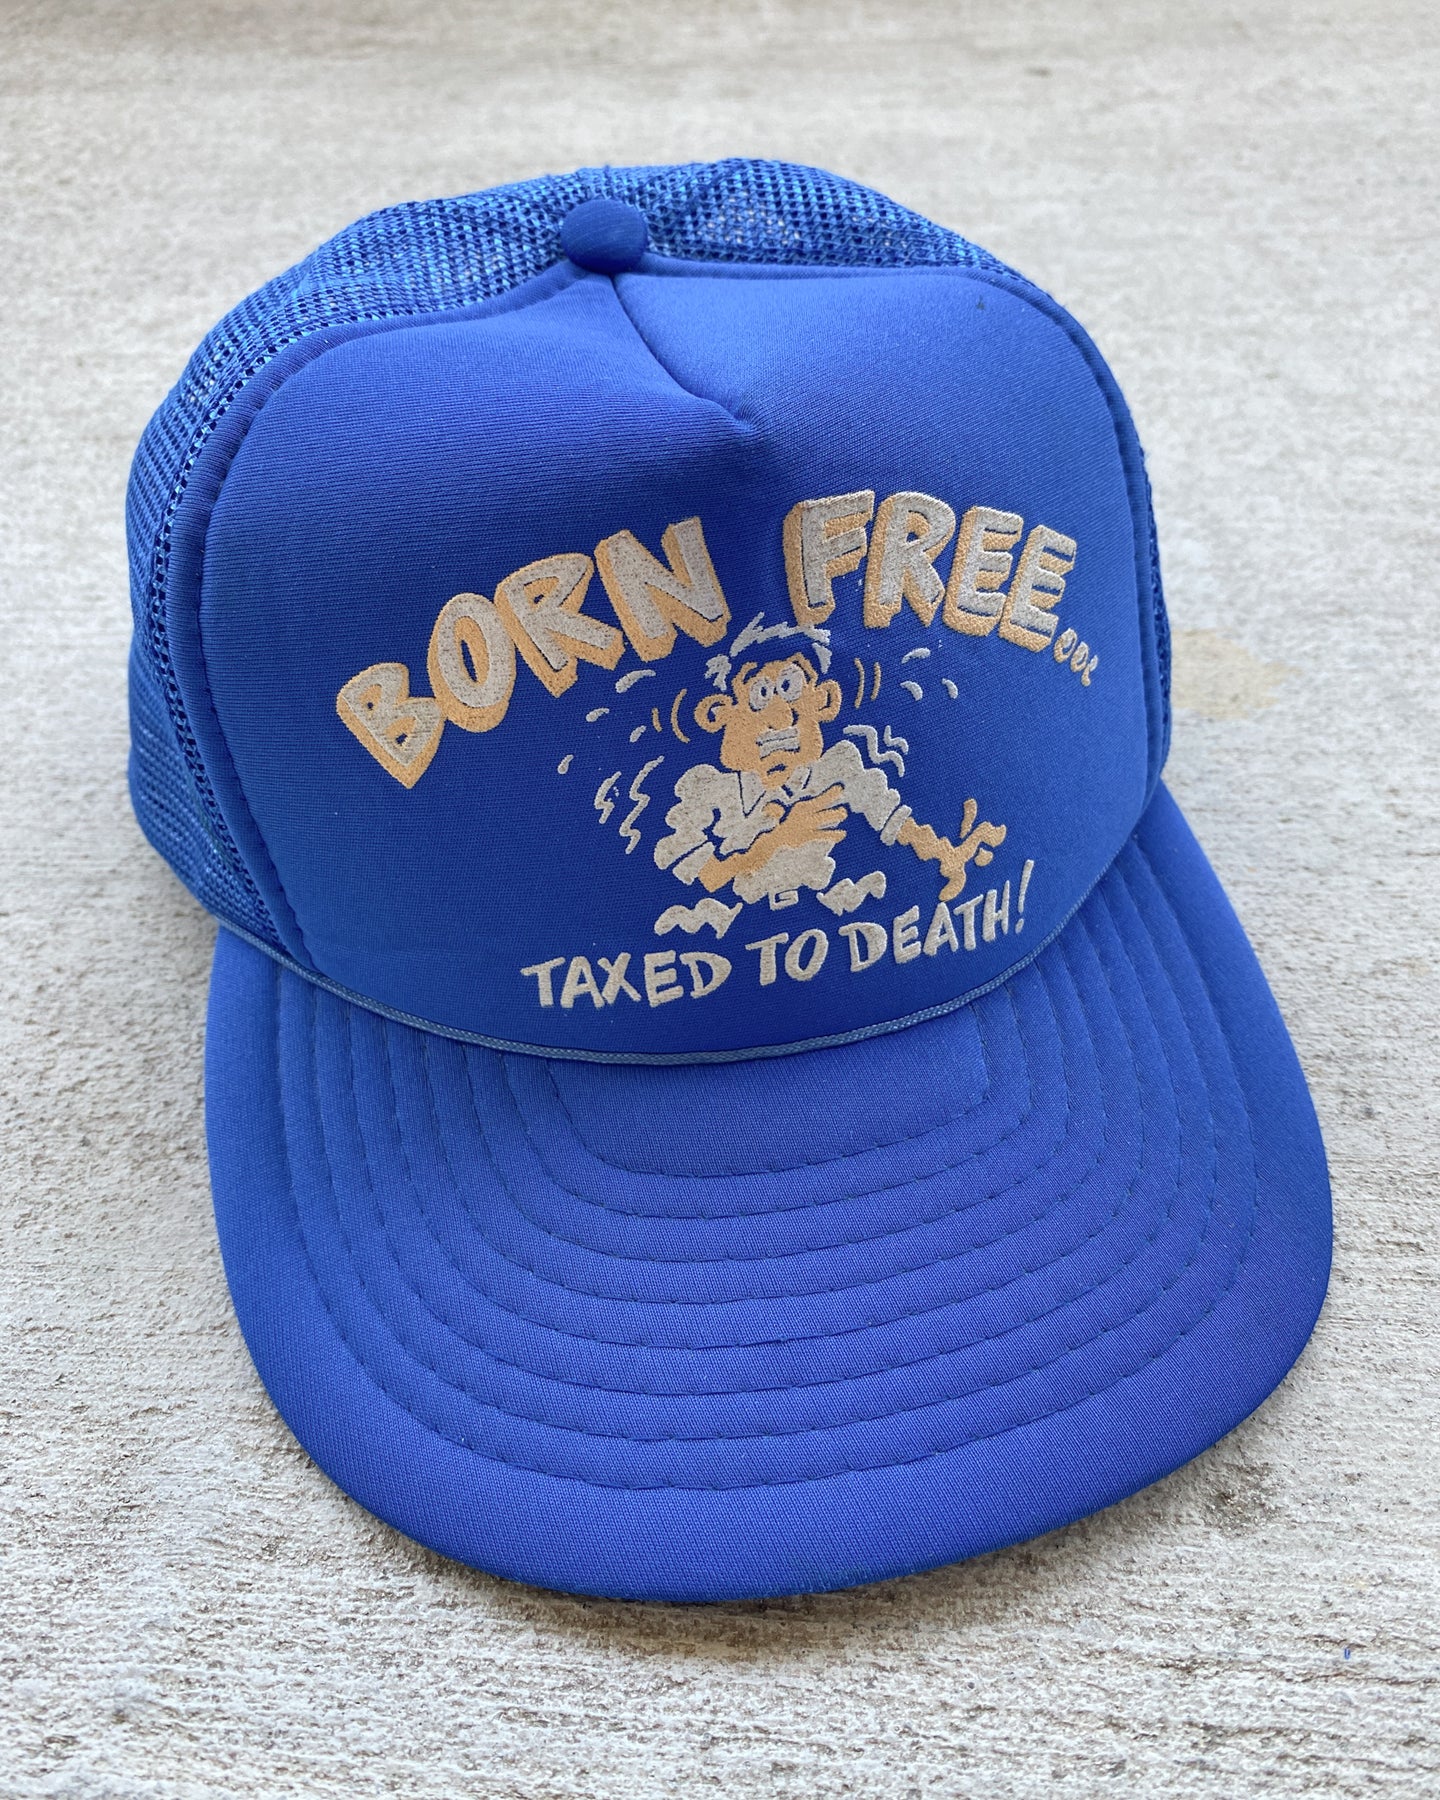 1980s Born Free Taxed to Death Snapback Trucker Hat - One Size